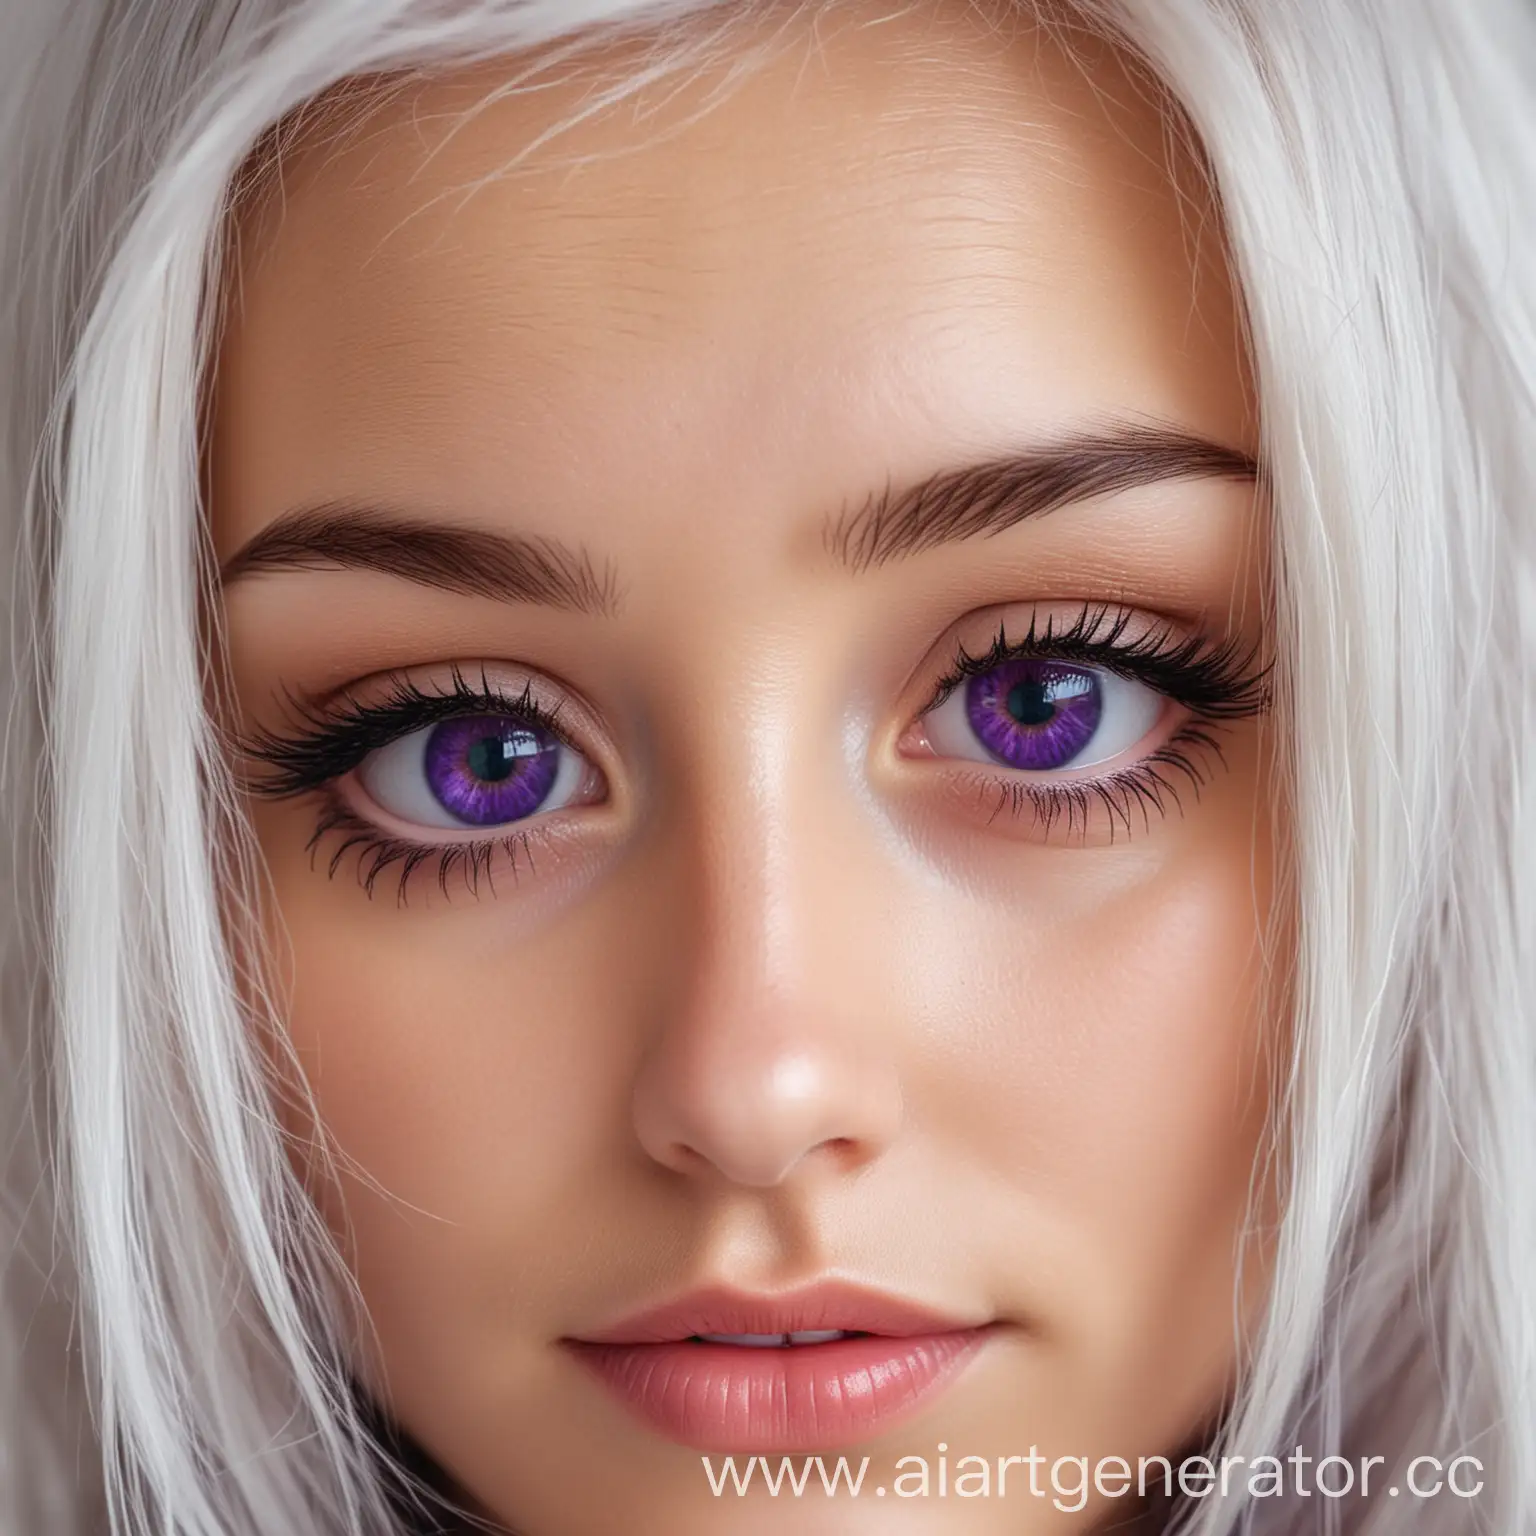 Closeup-Portrait-of-a-Girl-with-Stunning-Purple-Eyes-and-White-Hair